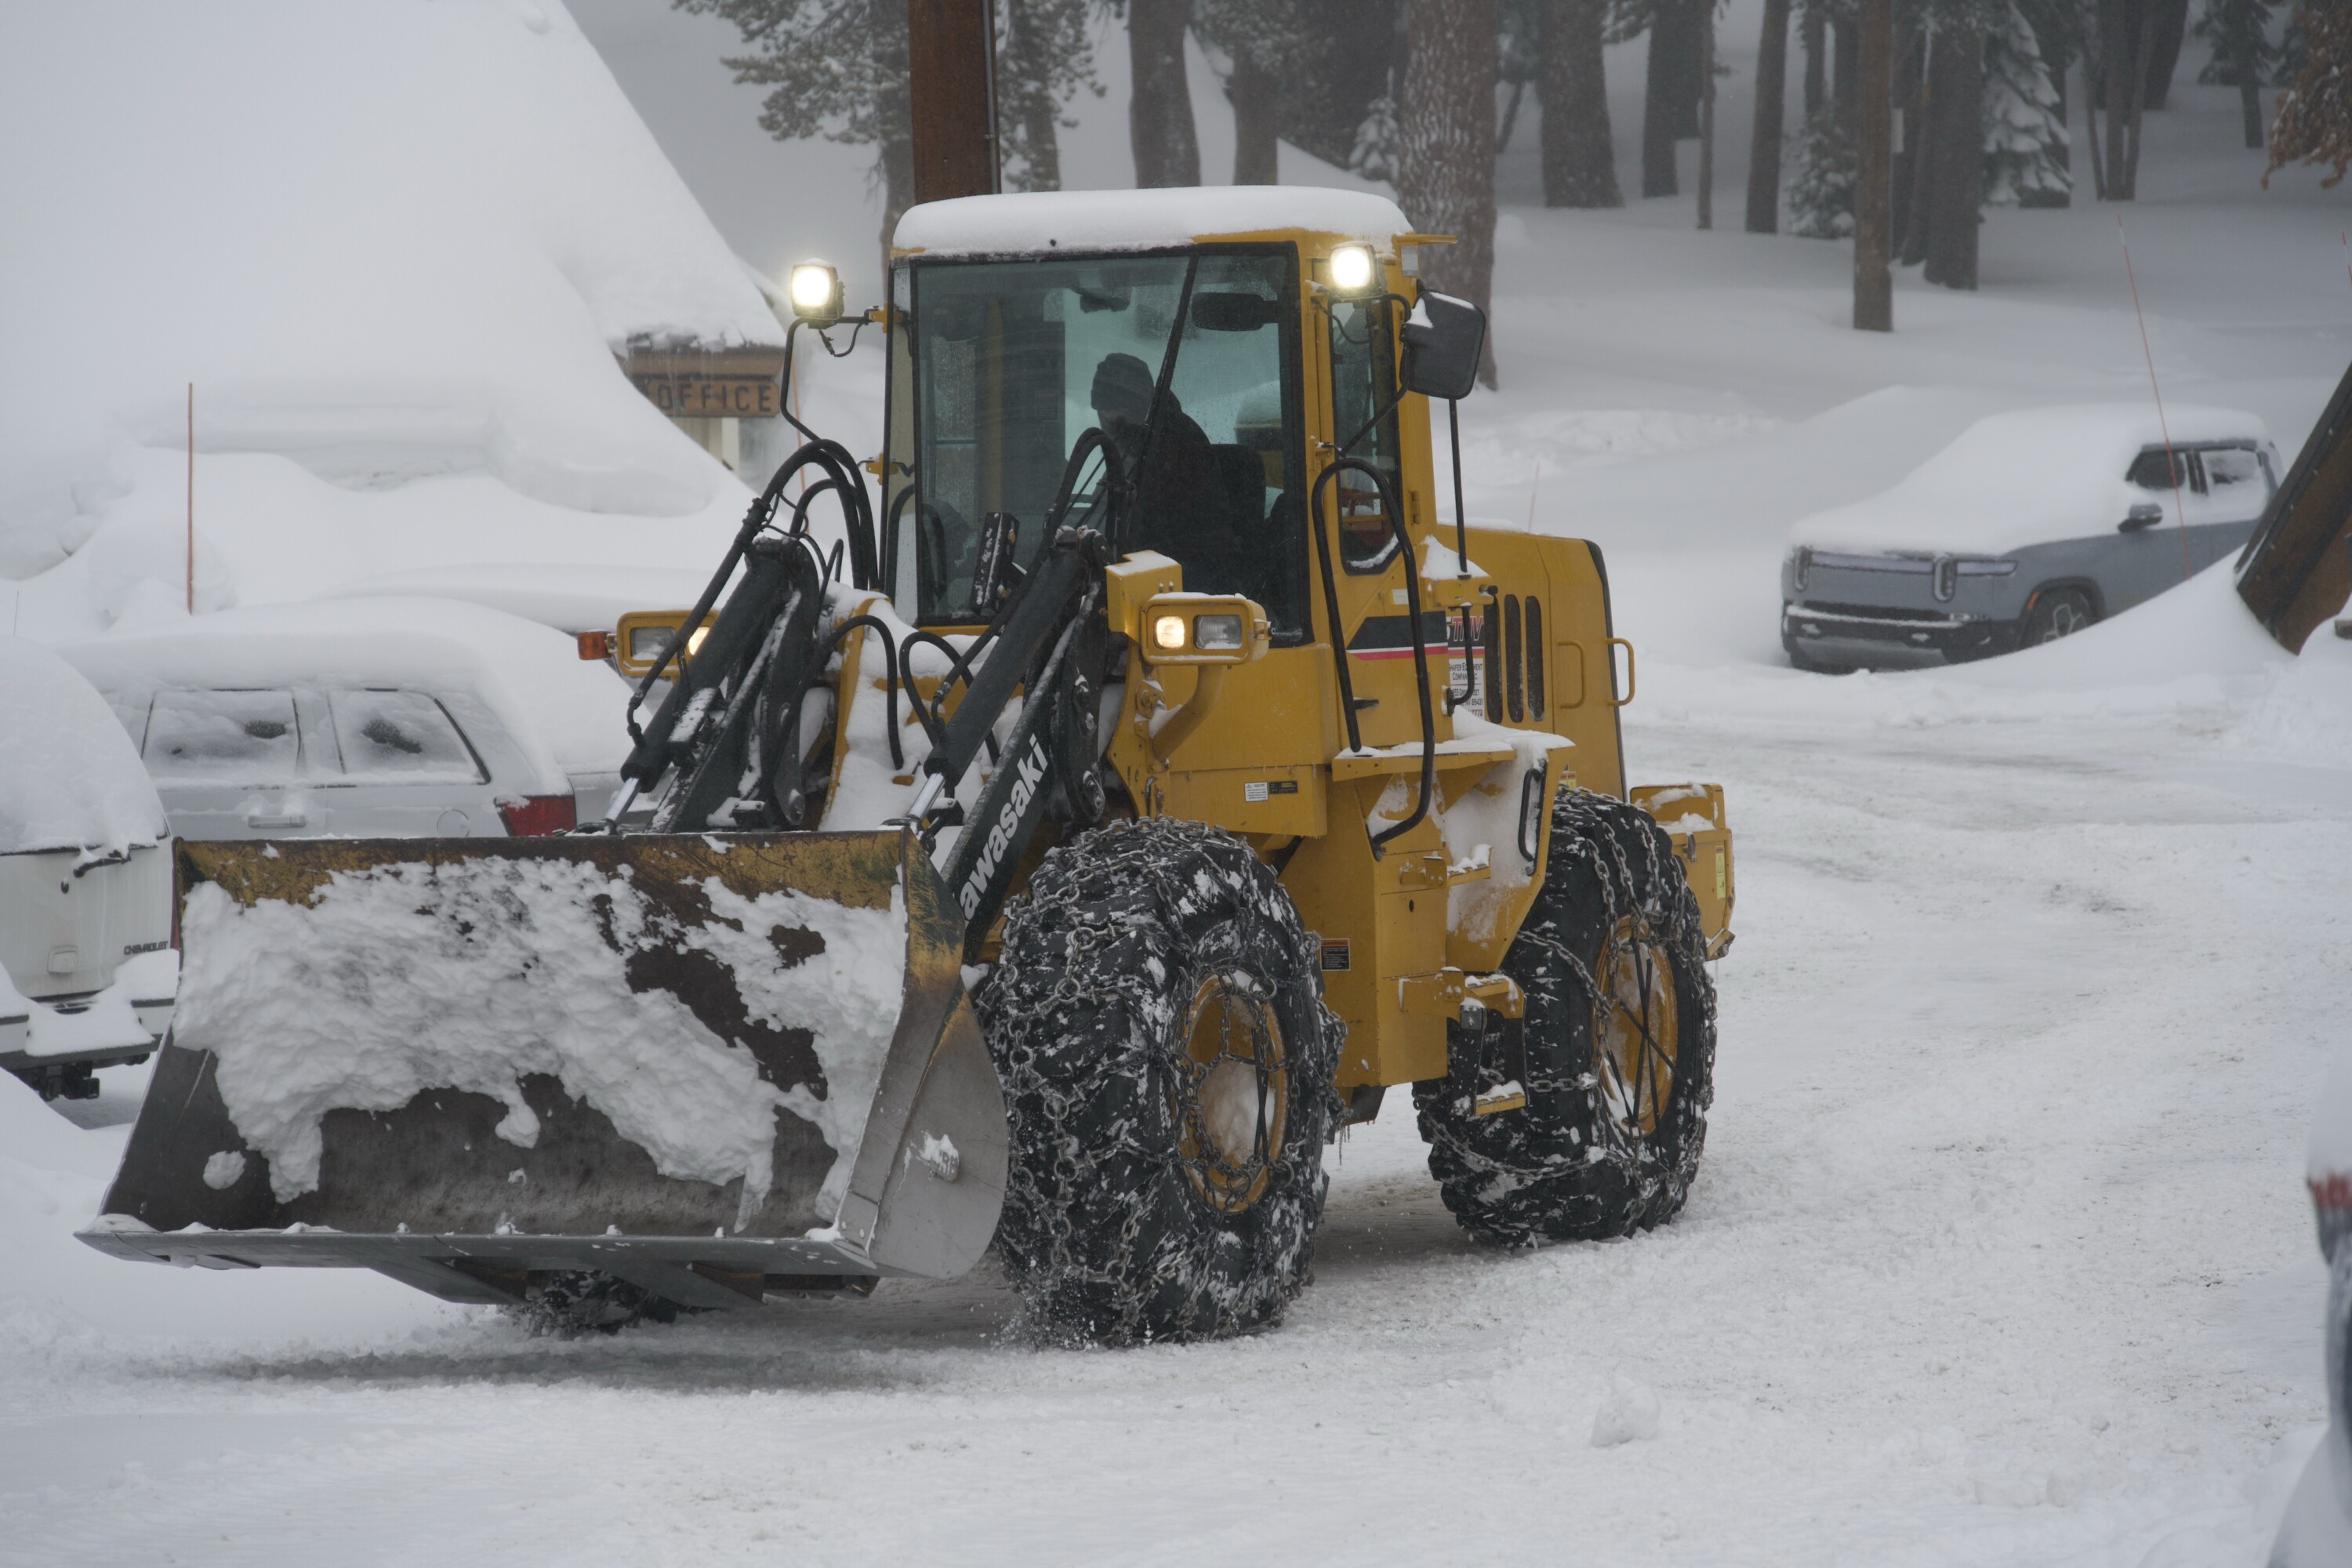 A bulldozer clearing snow from a parking lot at Mammoth Lakes.